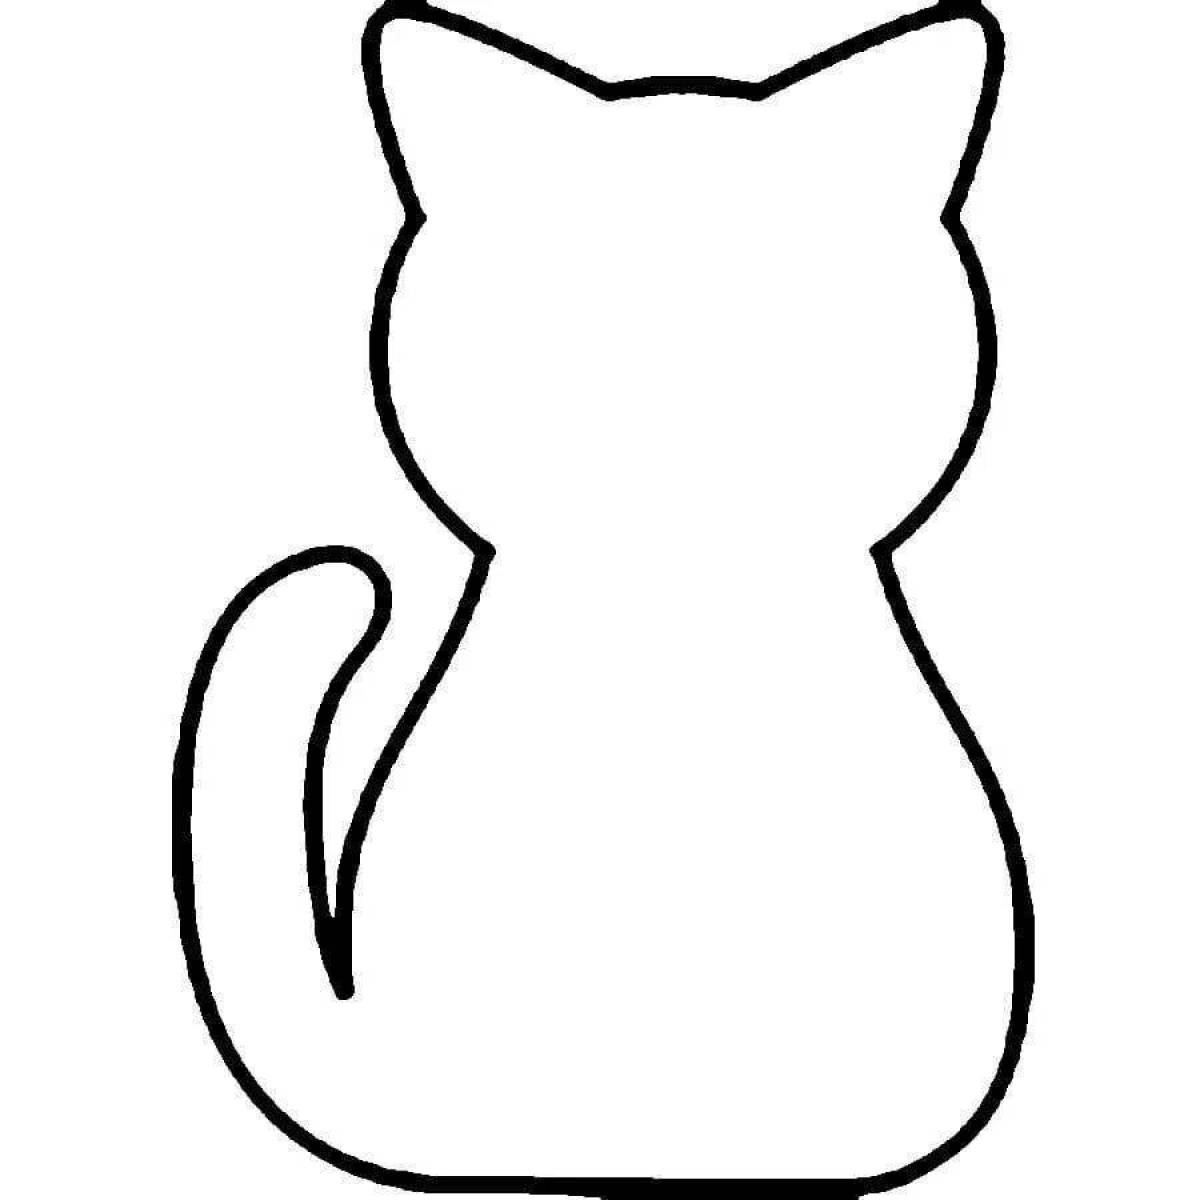 Coloring book silhouette of a playful cat